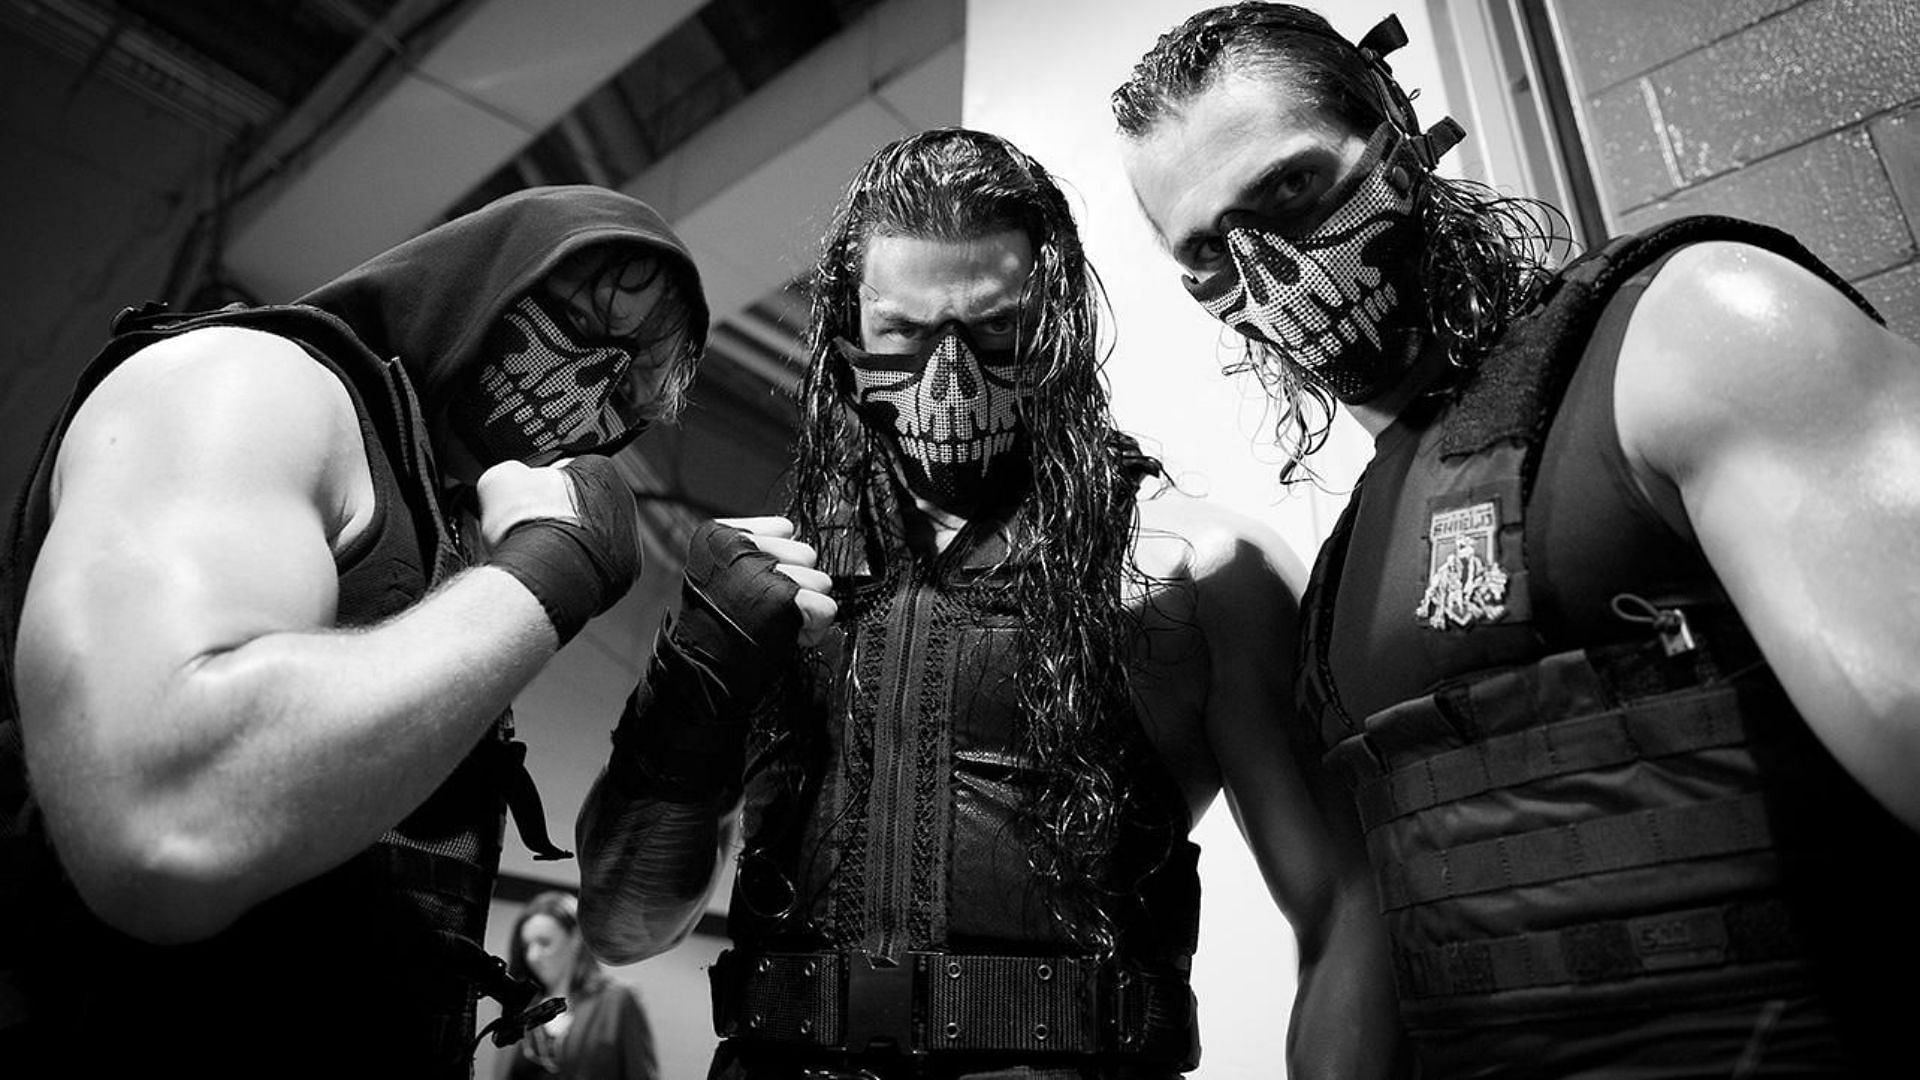 The Shield backstage at WrestleMania 30